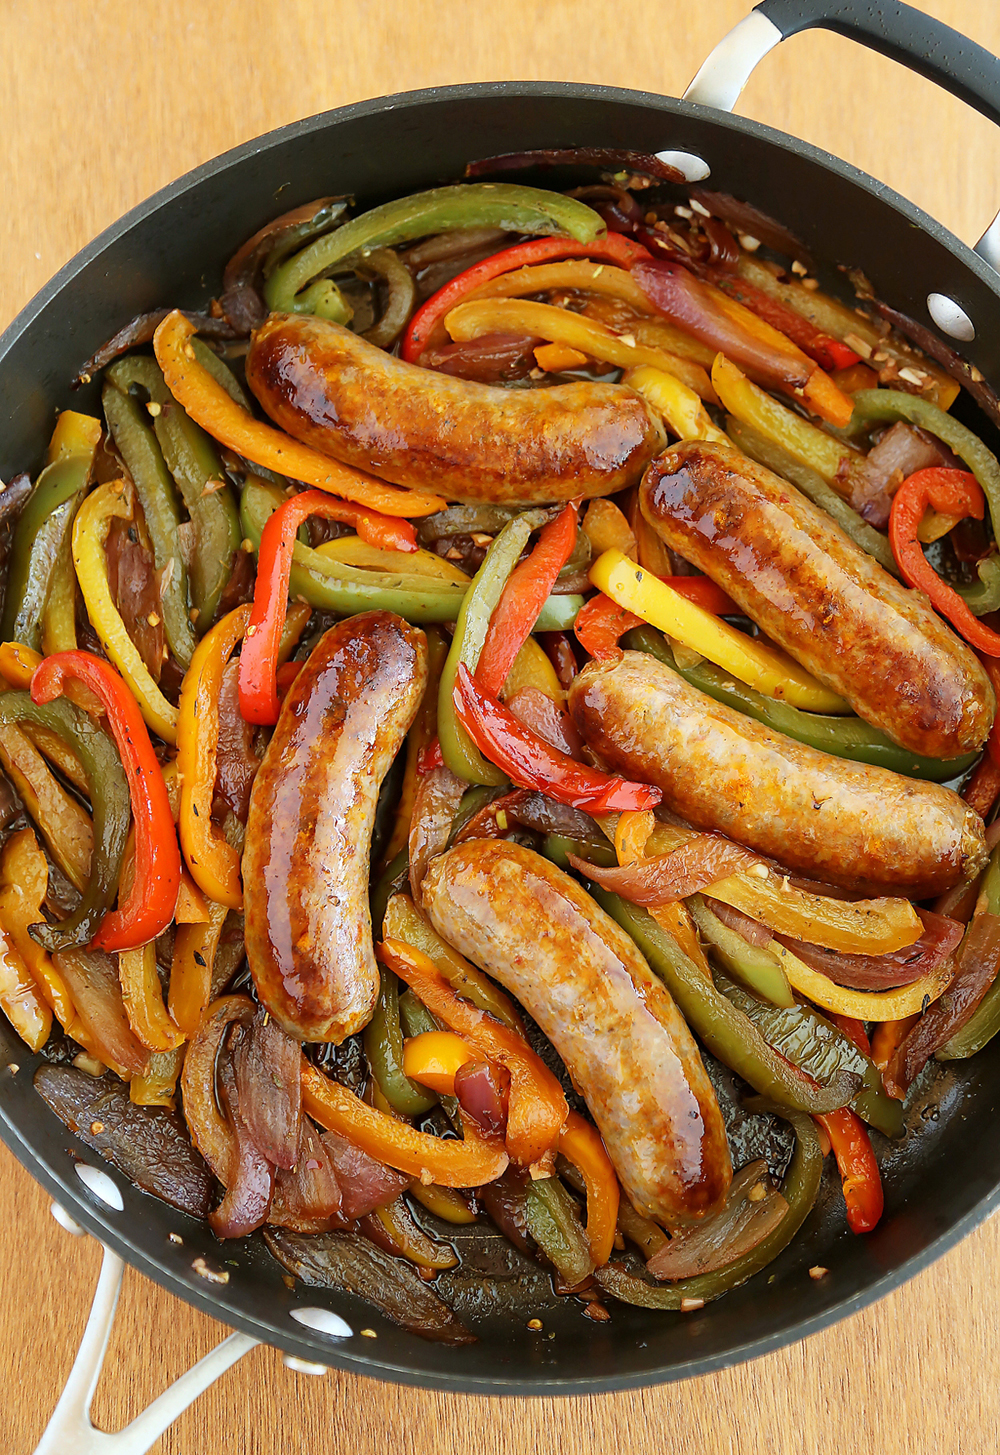 Skillet Italian Sausage, Peppers and Onions - Easy comfort food for weeknights & game days! Serve over pasta, polenta, potatoes or on warm crusty rolls. Thecomfortofcooking.com